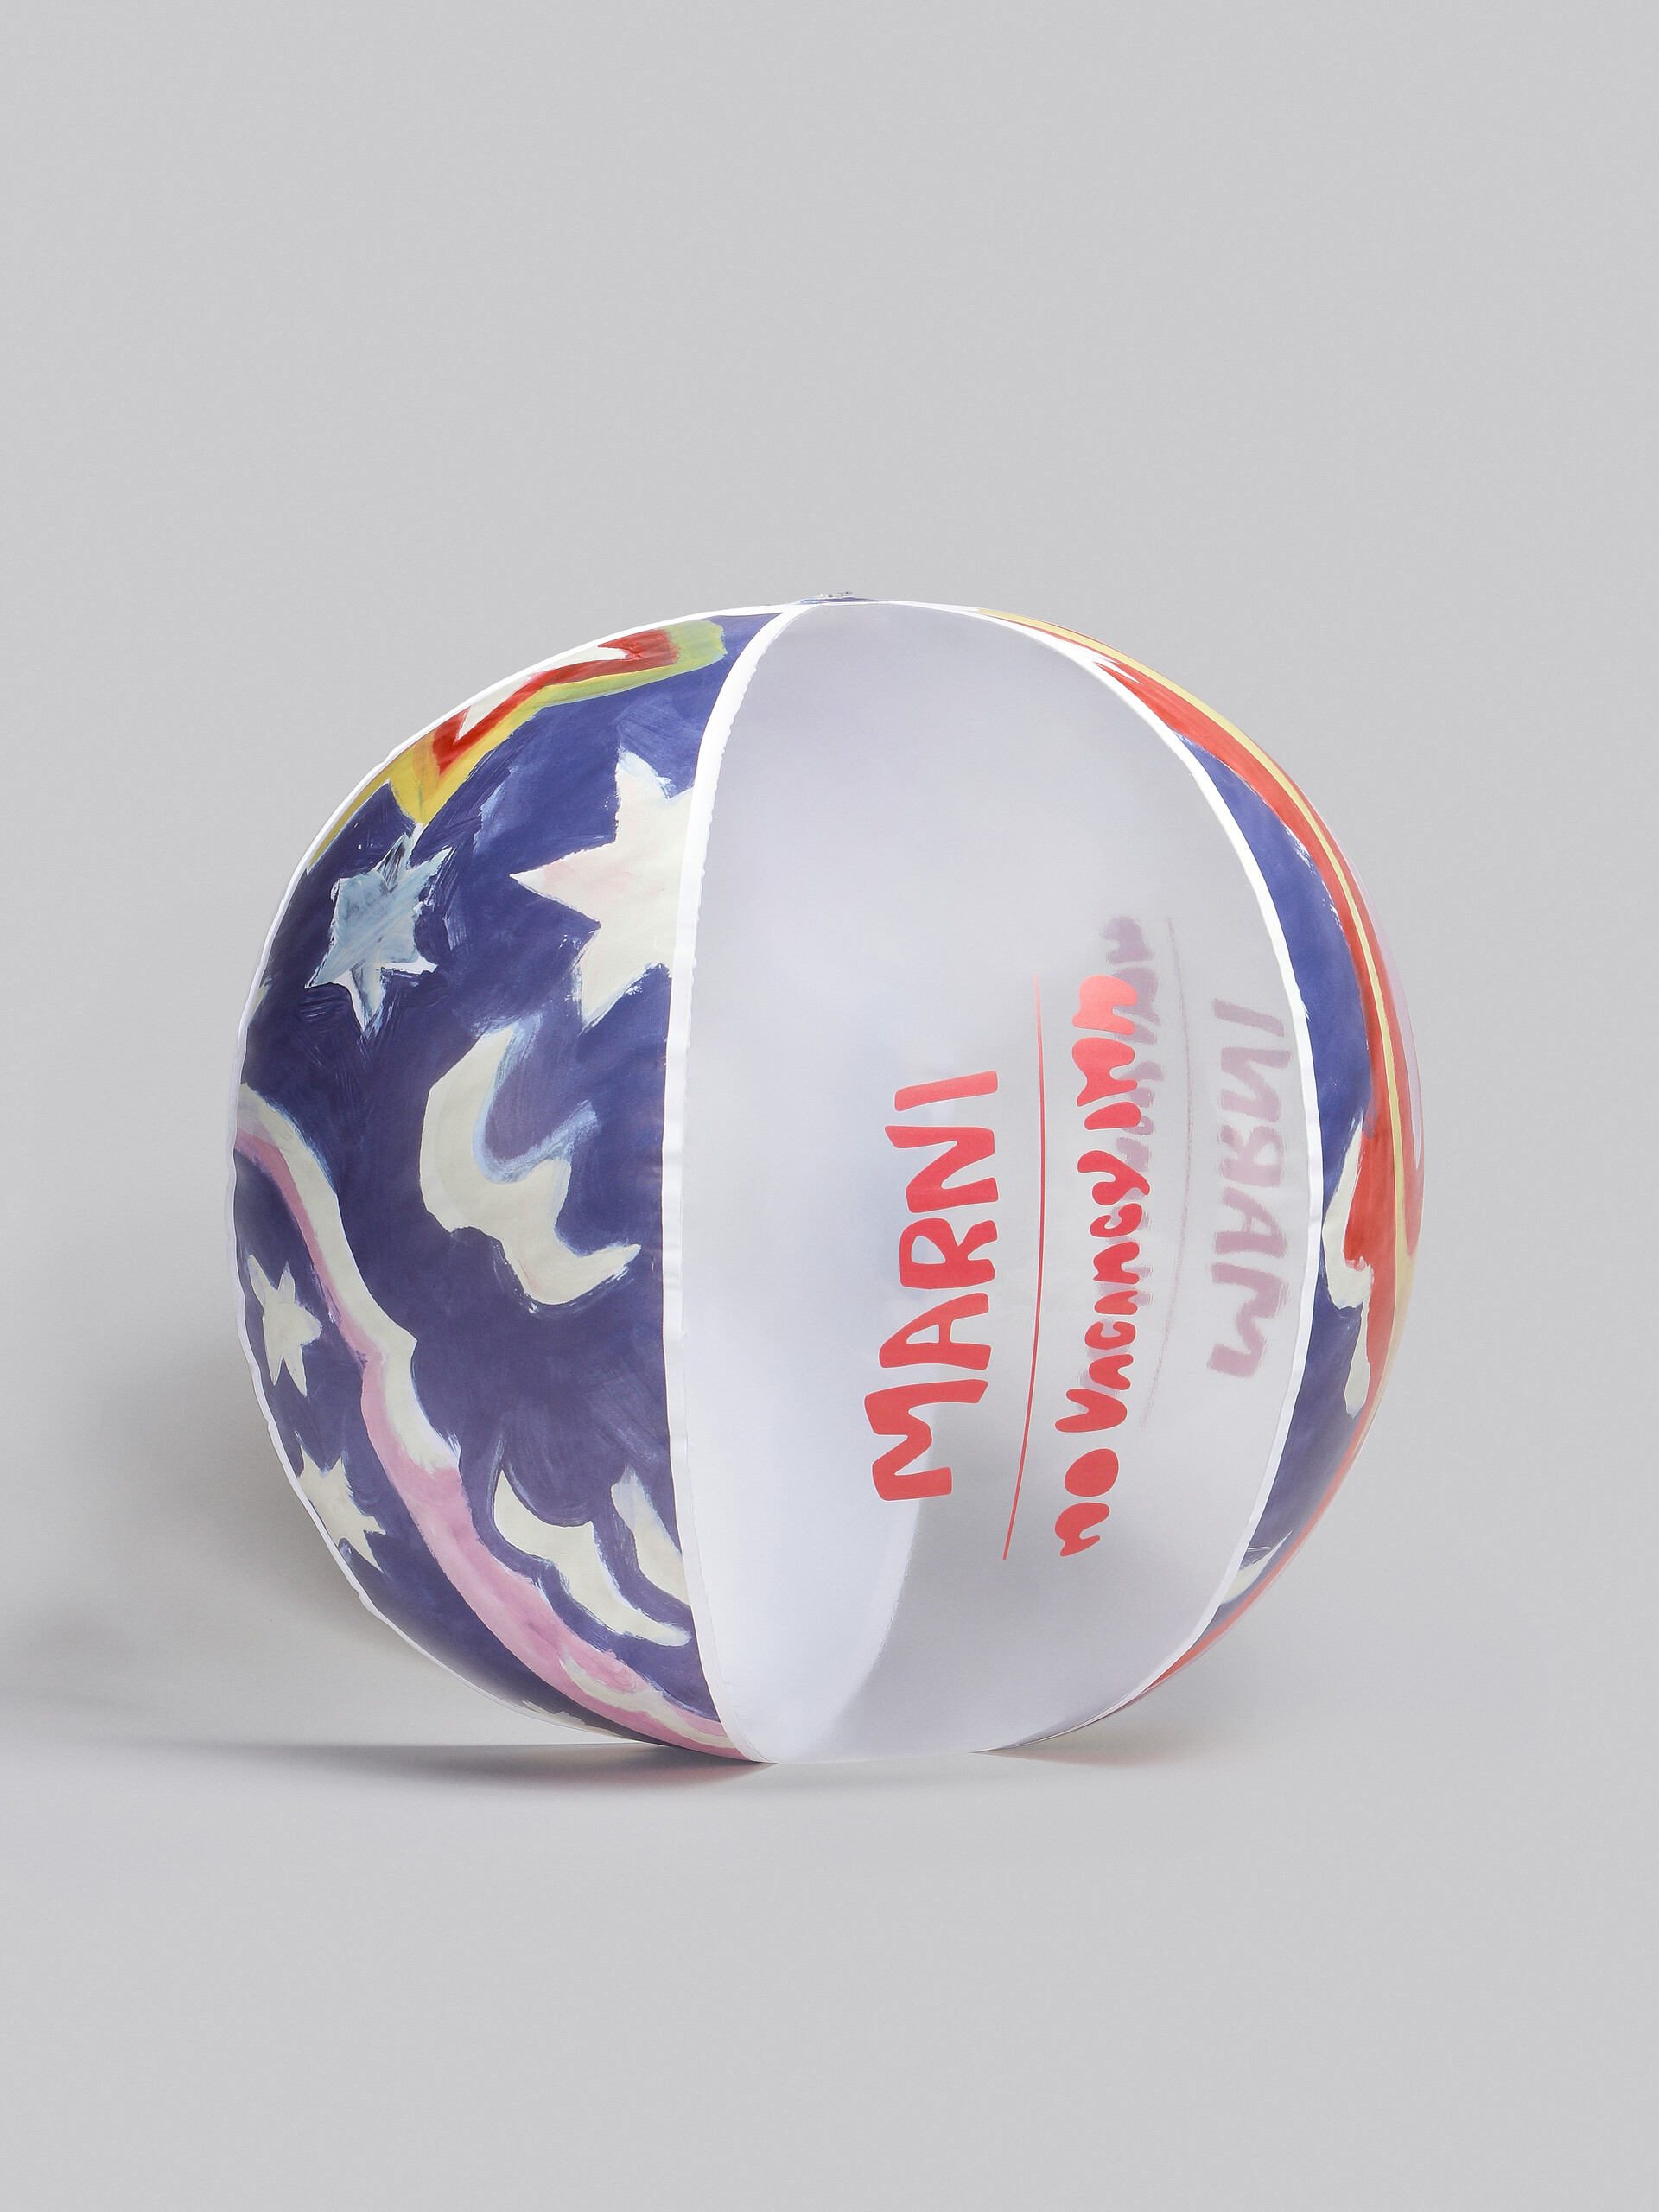 Marni x No Vacancy Inn - Inflatable ball with Galactic Paradise print - Other accessories - Image 3